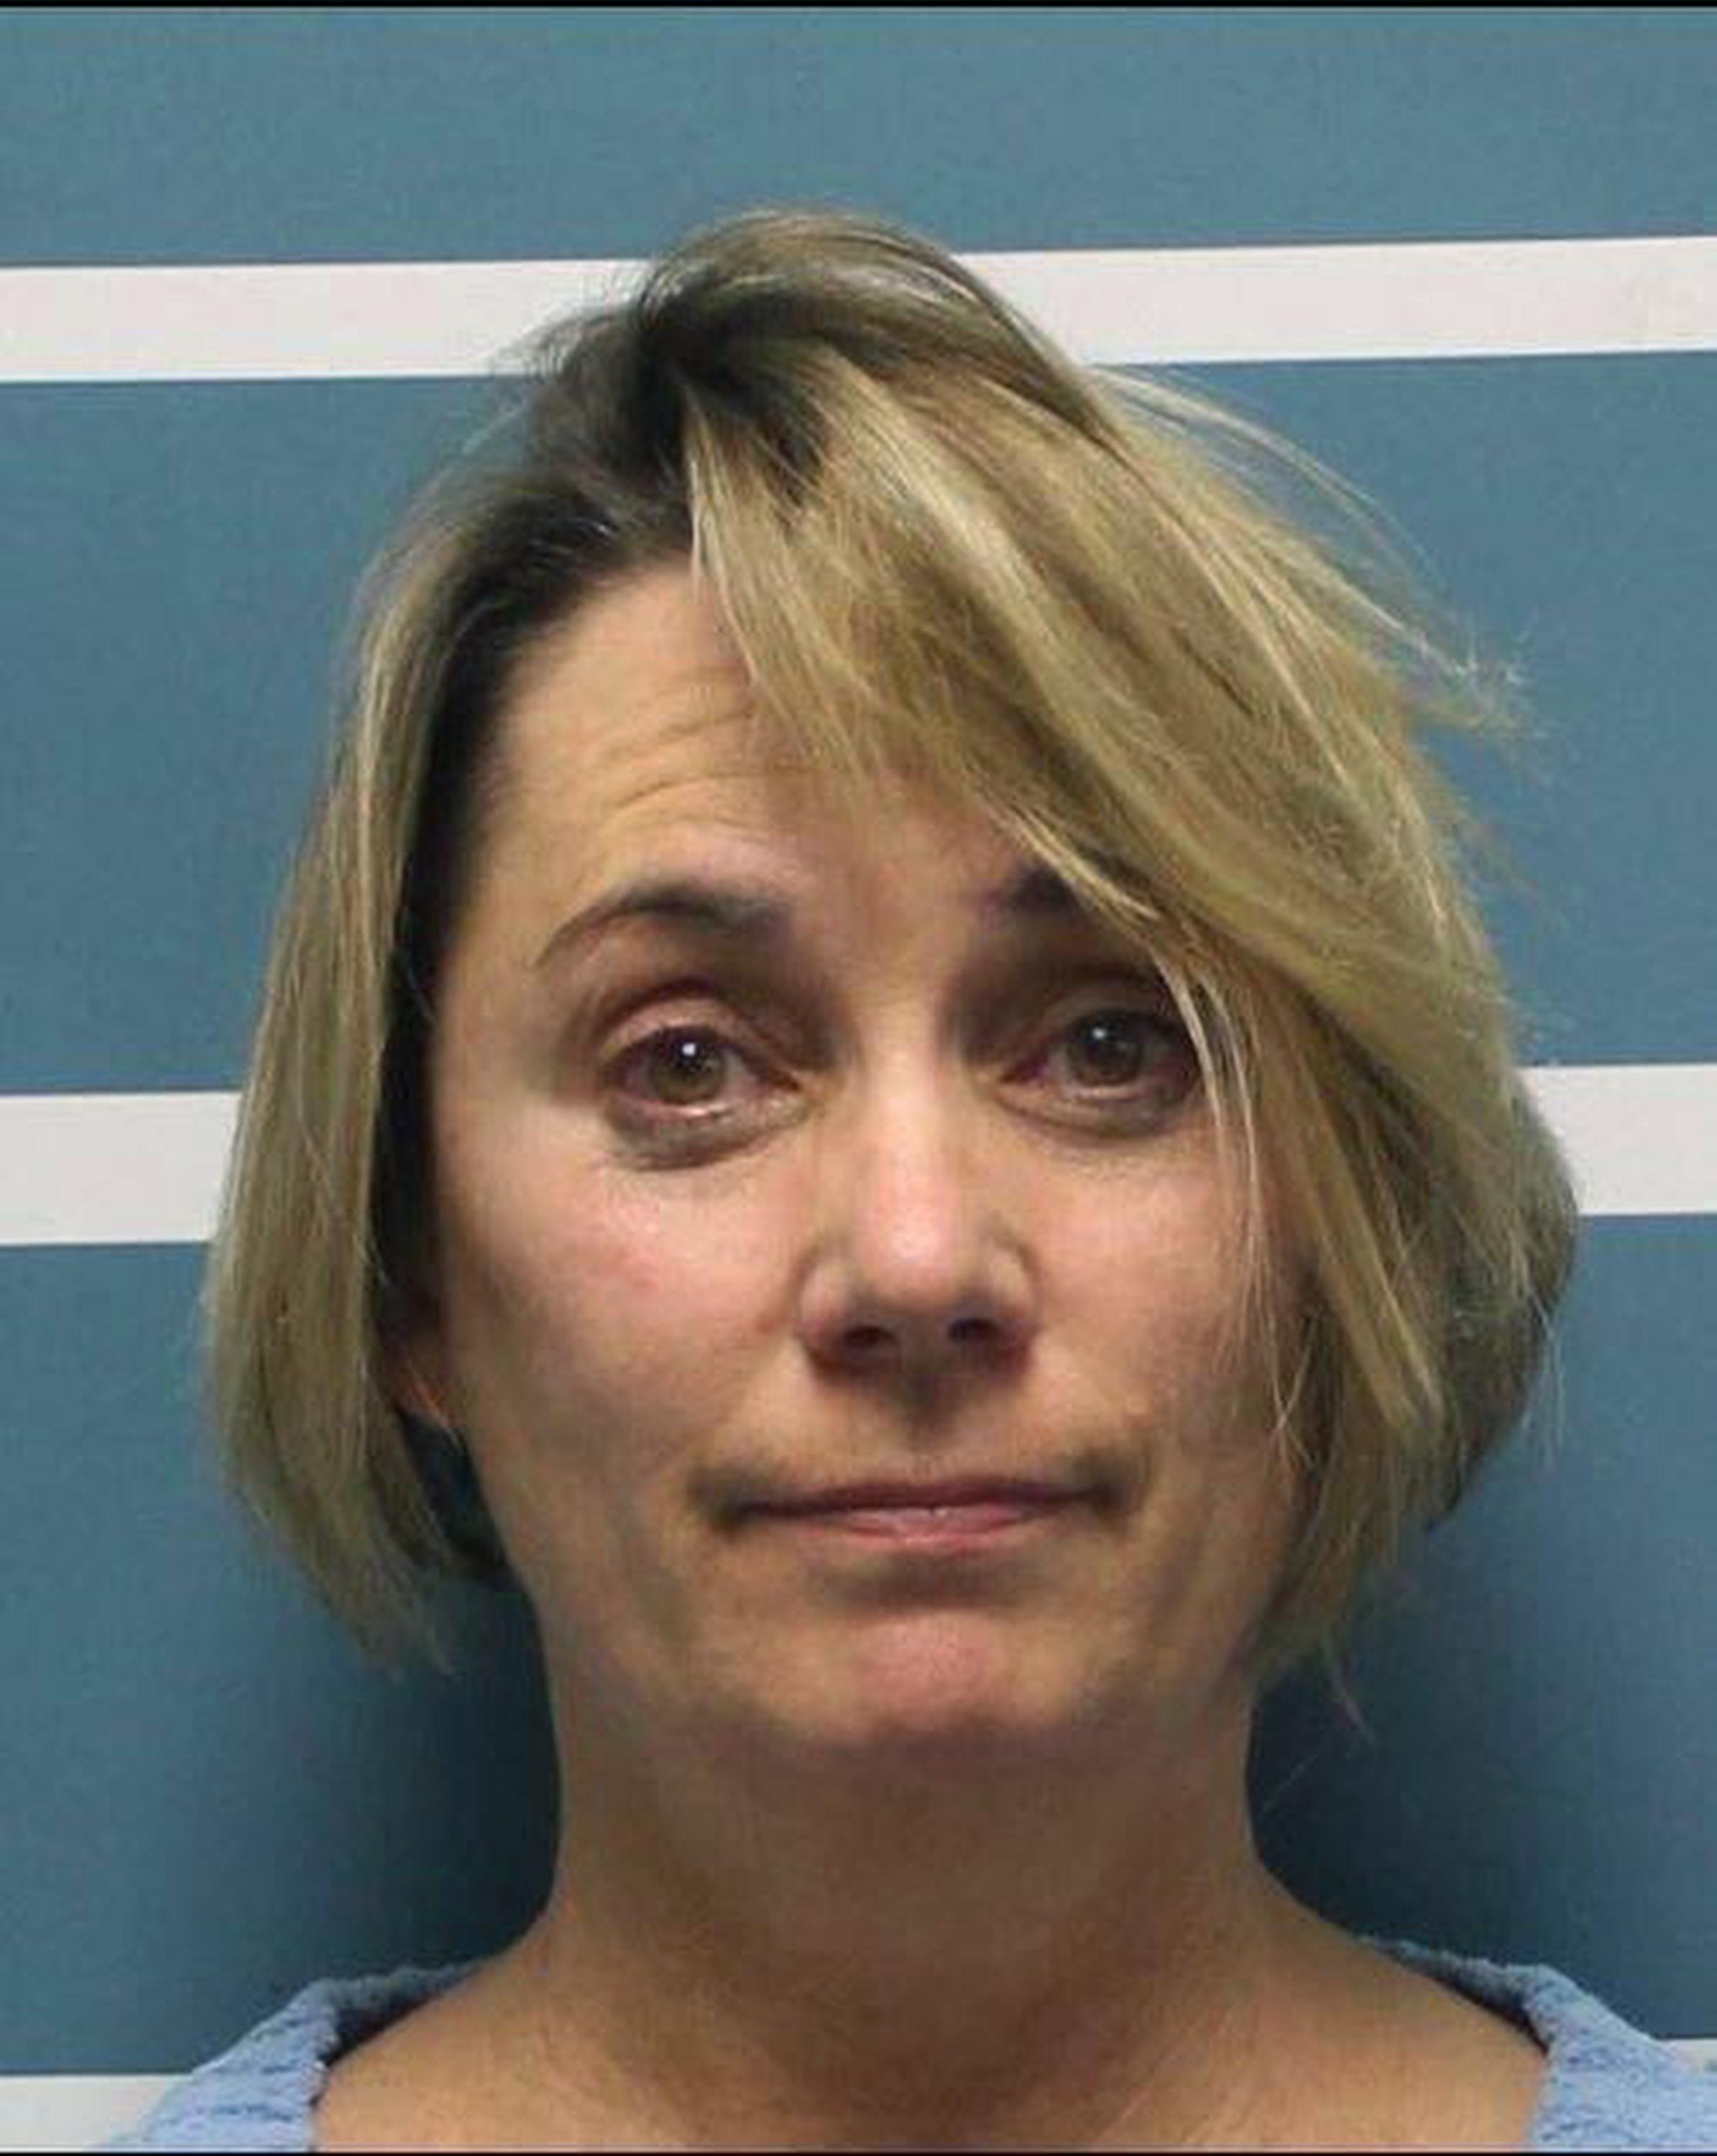 California Teacher Charged After Forcing Haircut On Boy The